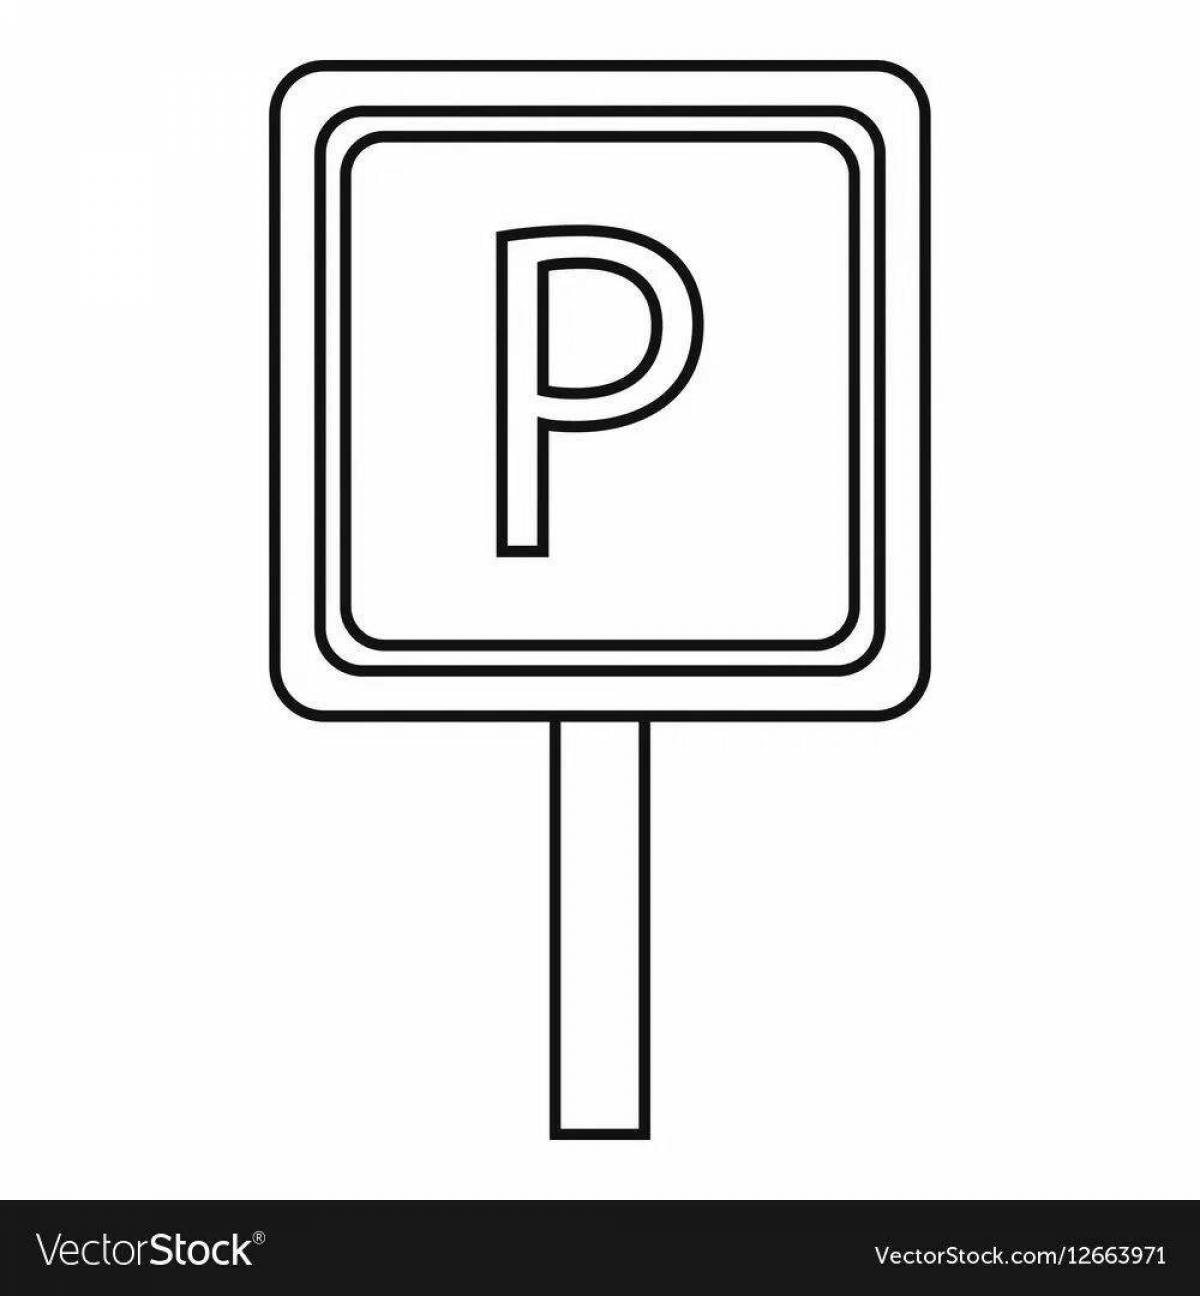 Great parking sign coloring page